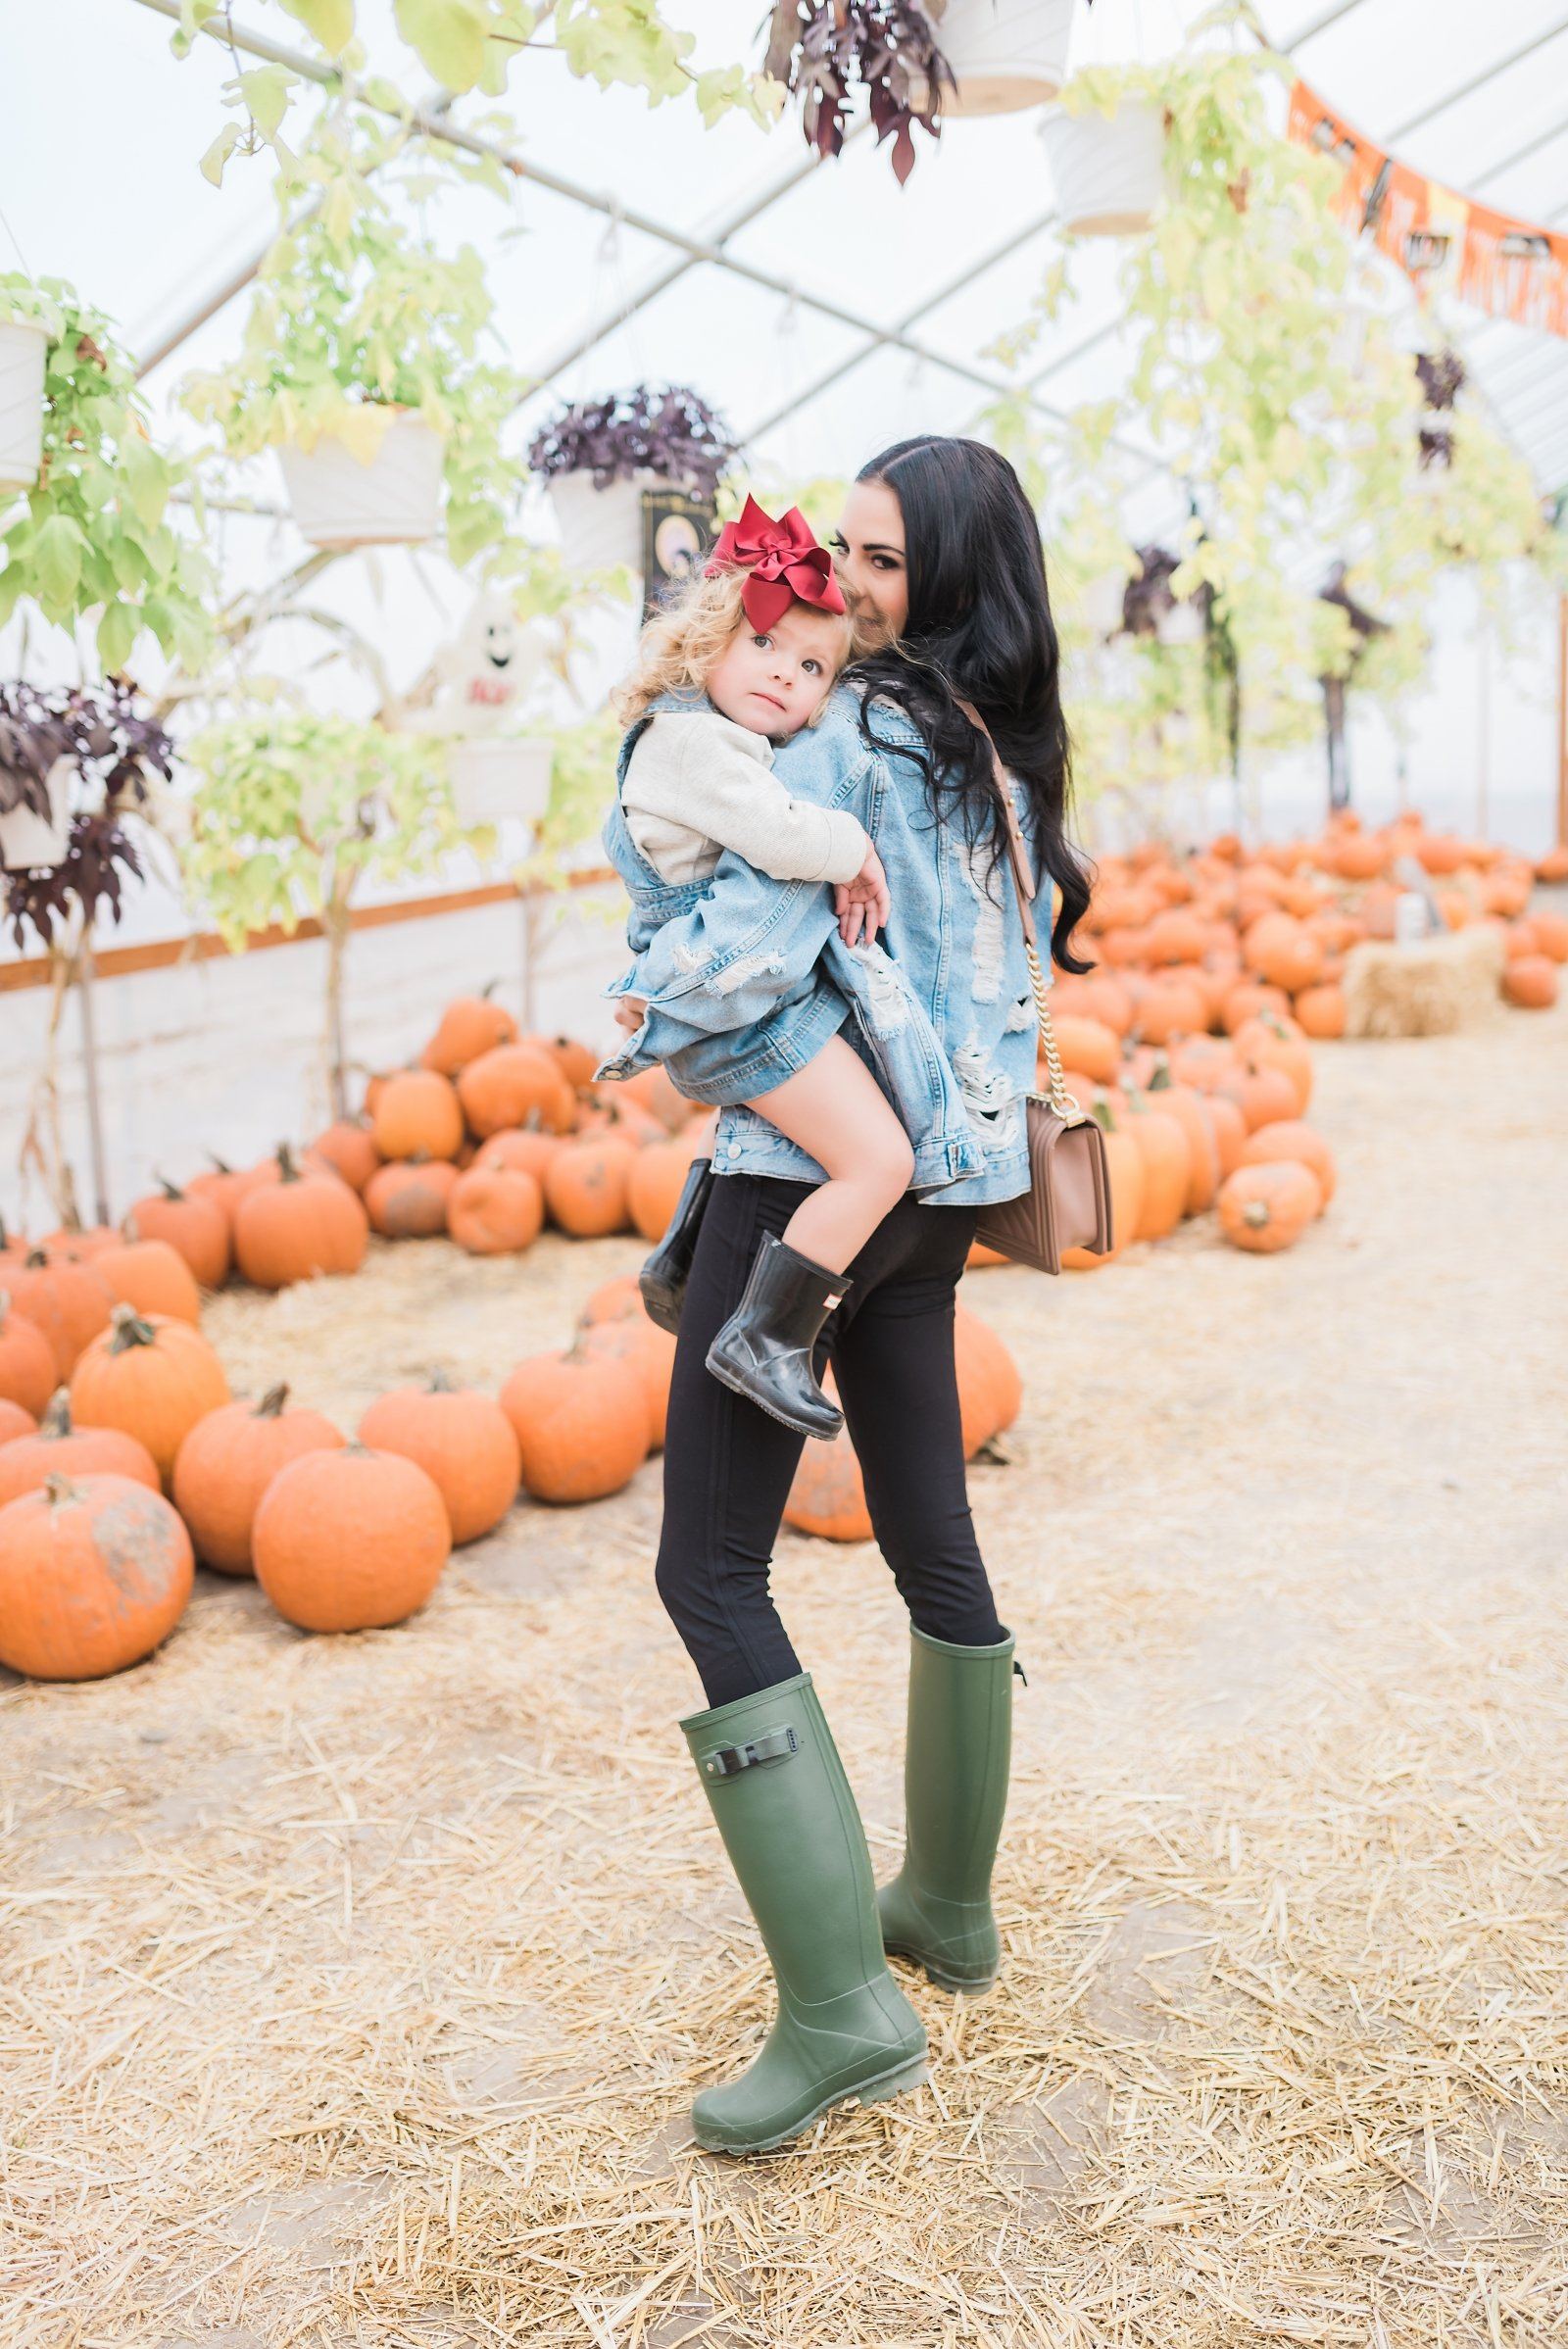 Trip To The Pumpkin Patch...